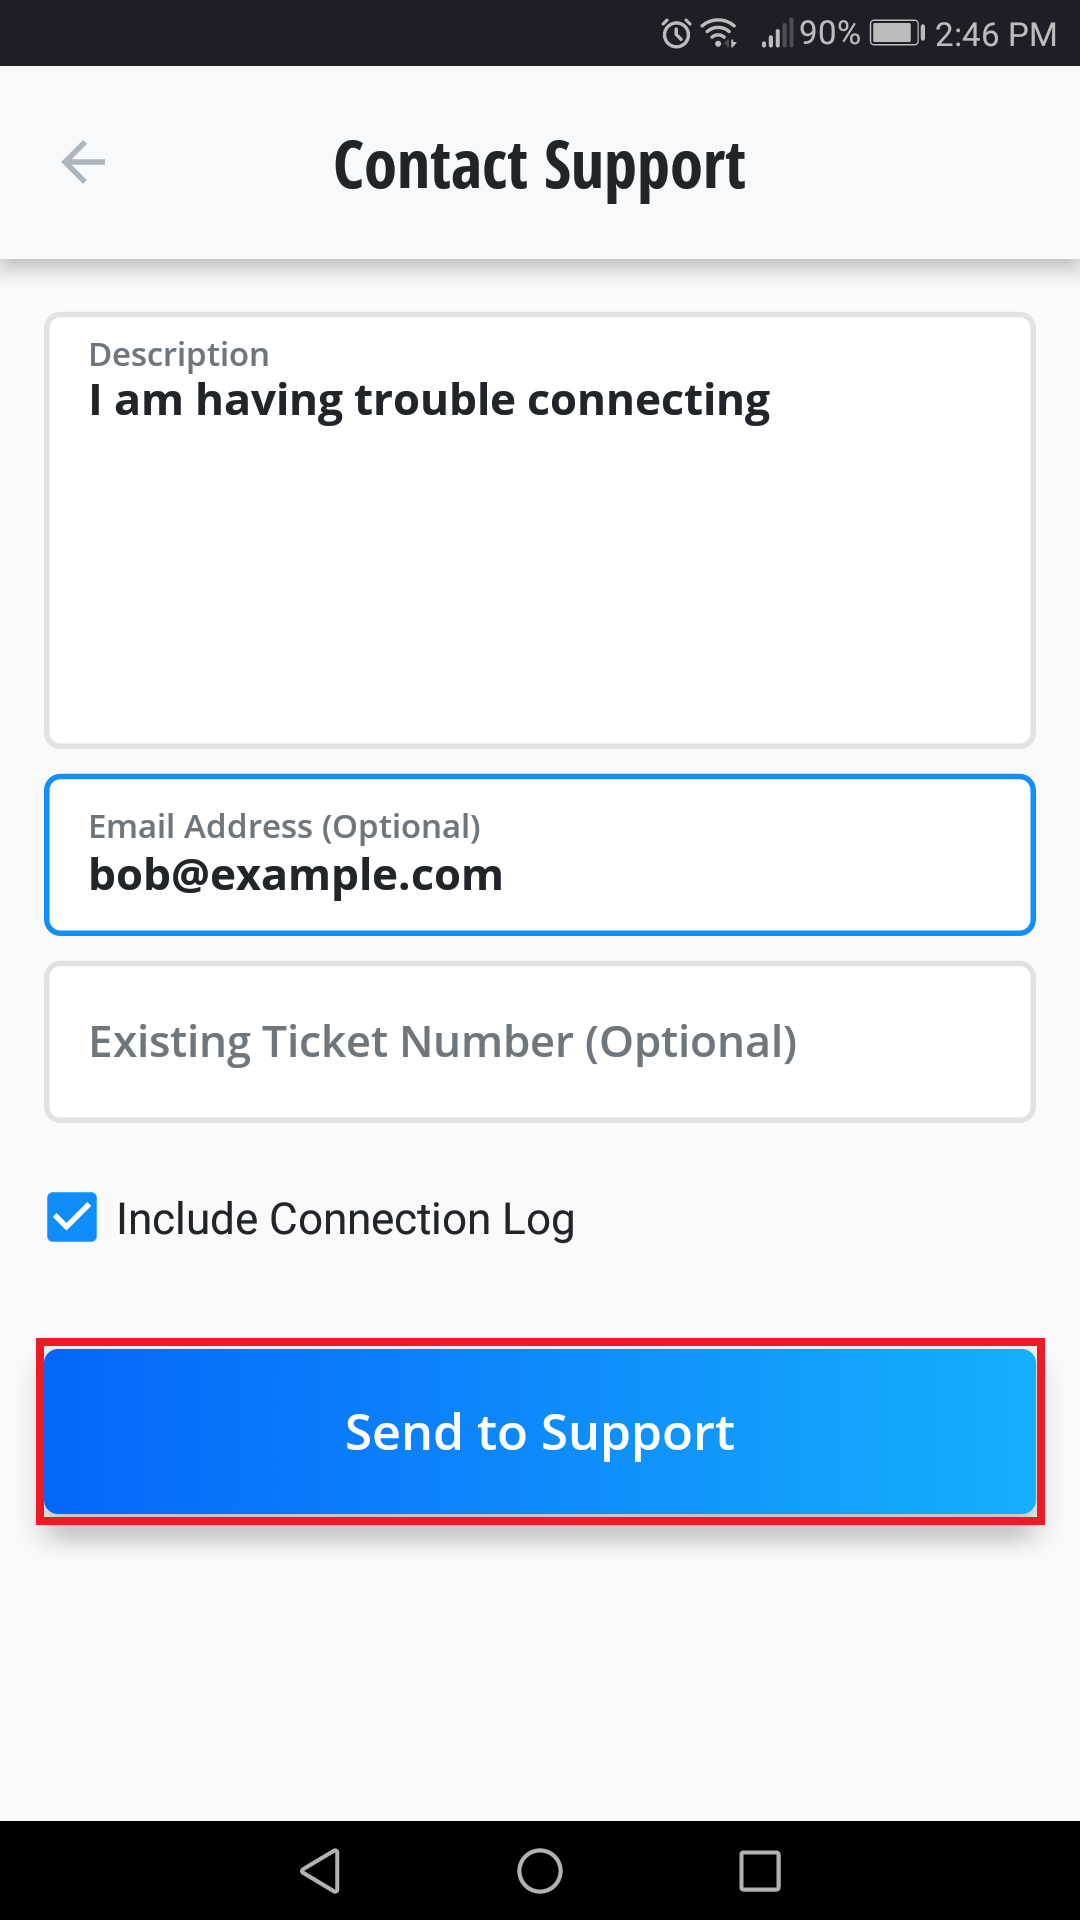 Vypr_App_-_Contact_Support_Screen_-_Send_to_Support_Selected.png